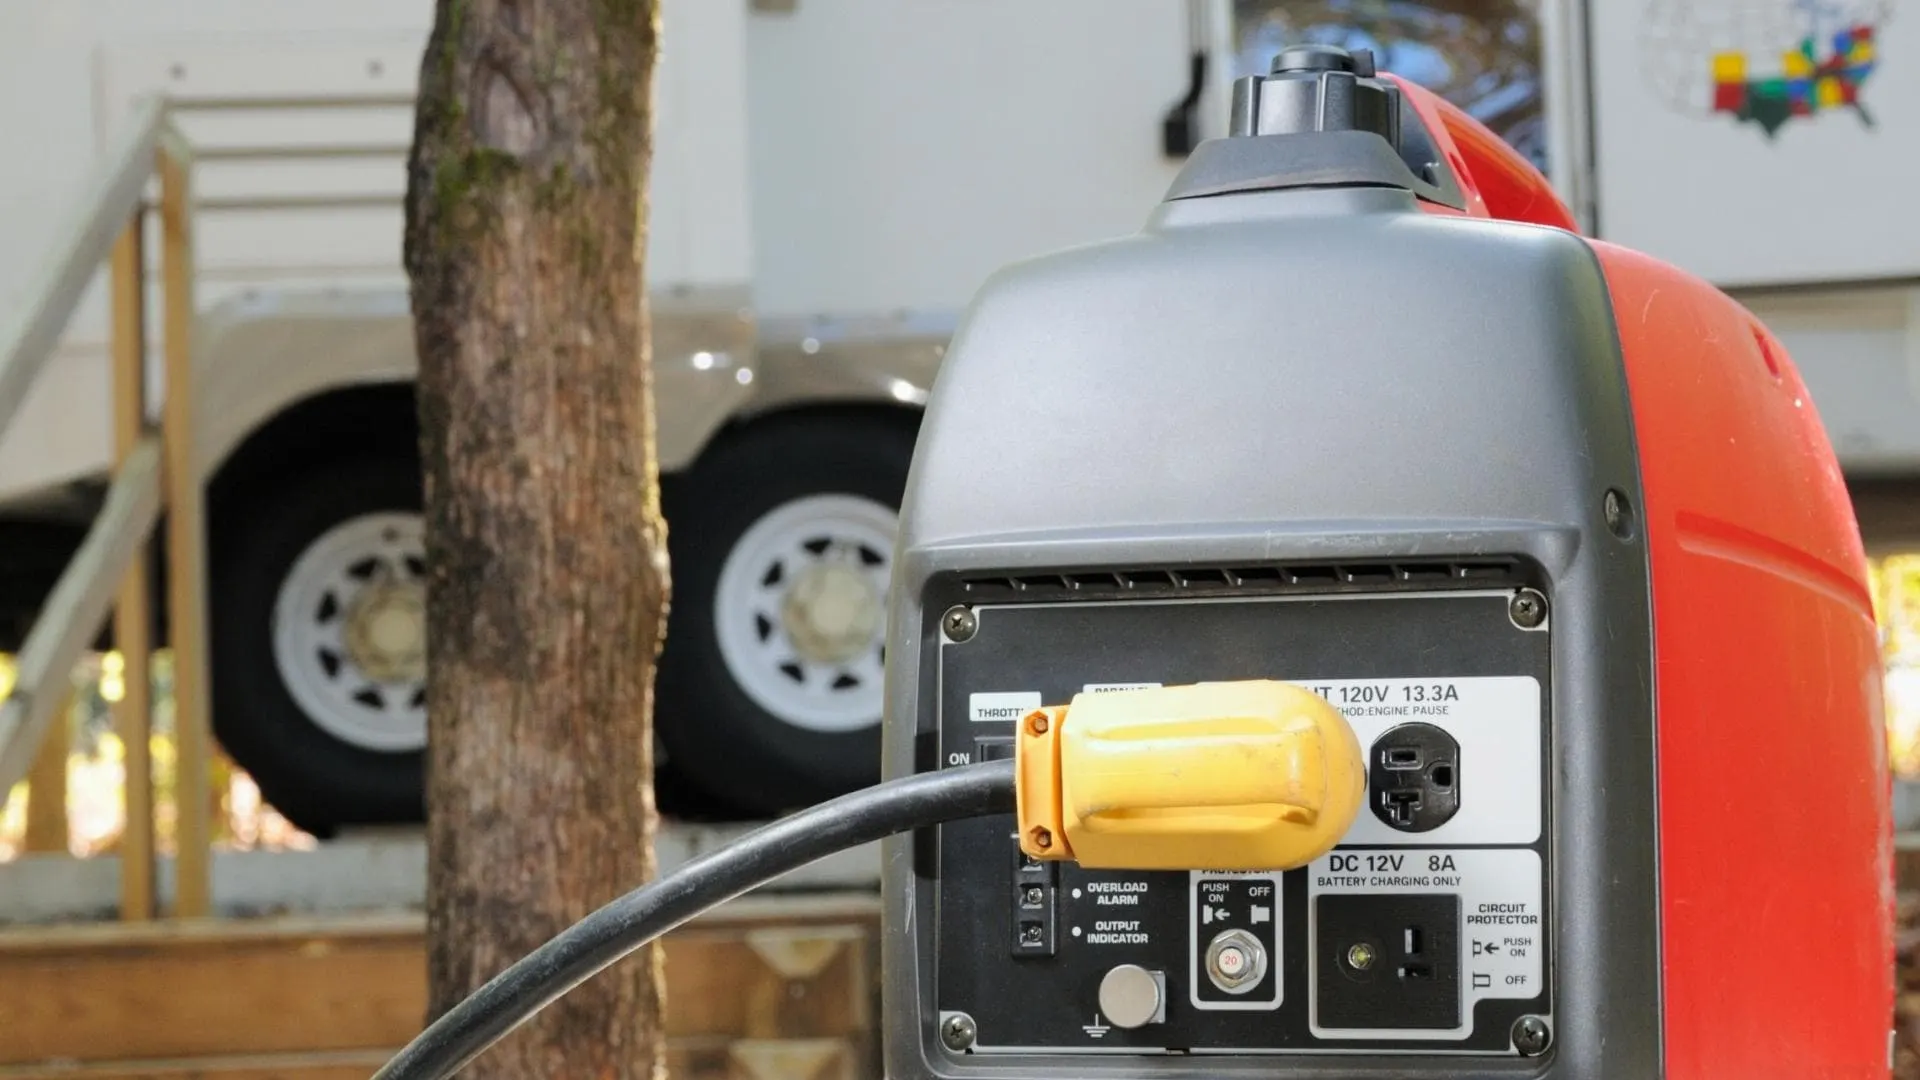 RV microwave not working? Photo of a portable inverter generator powering an RV